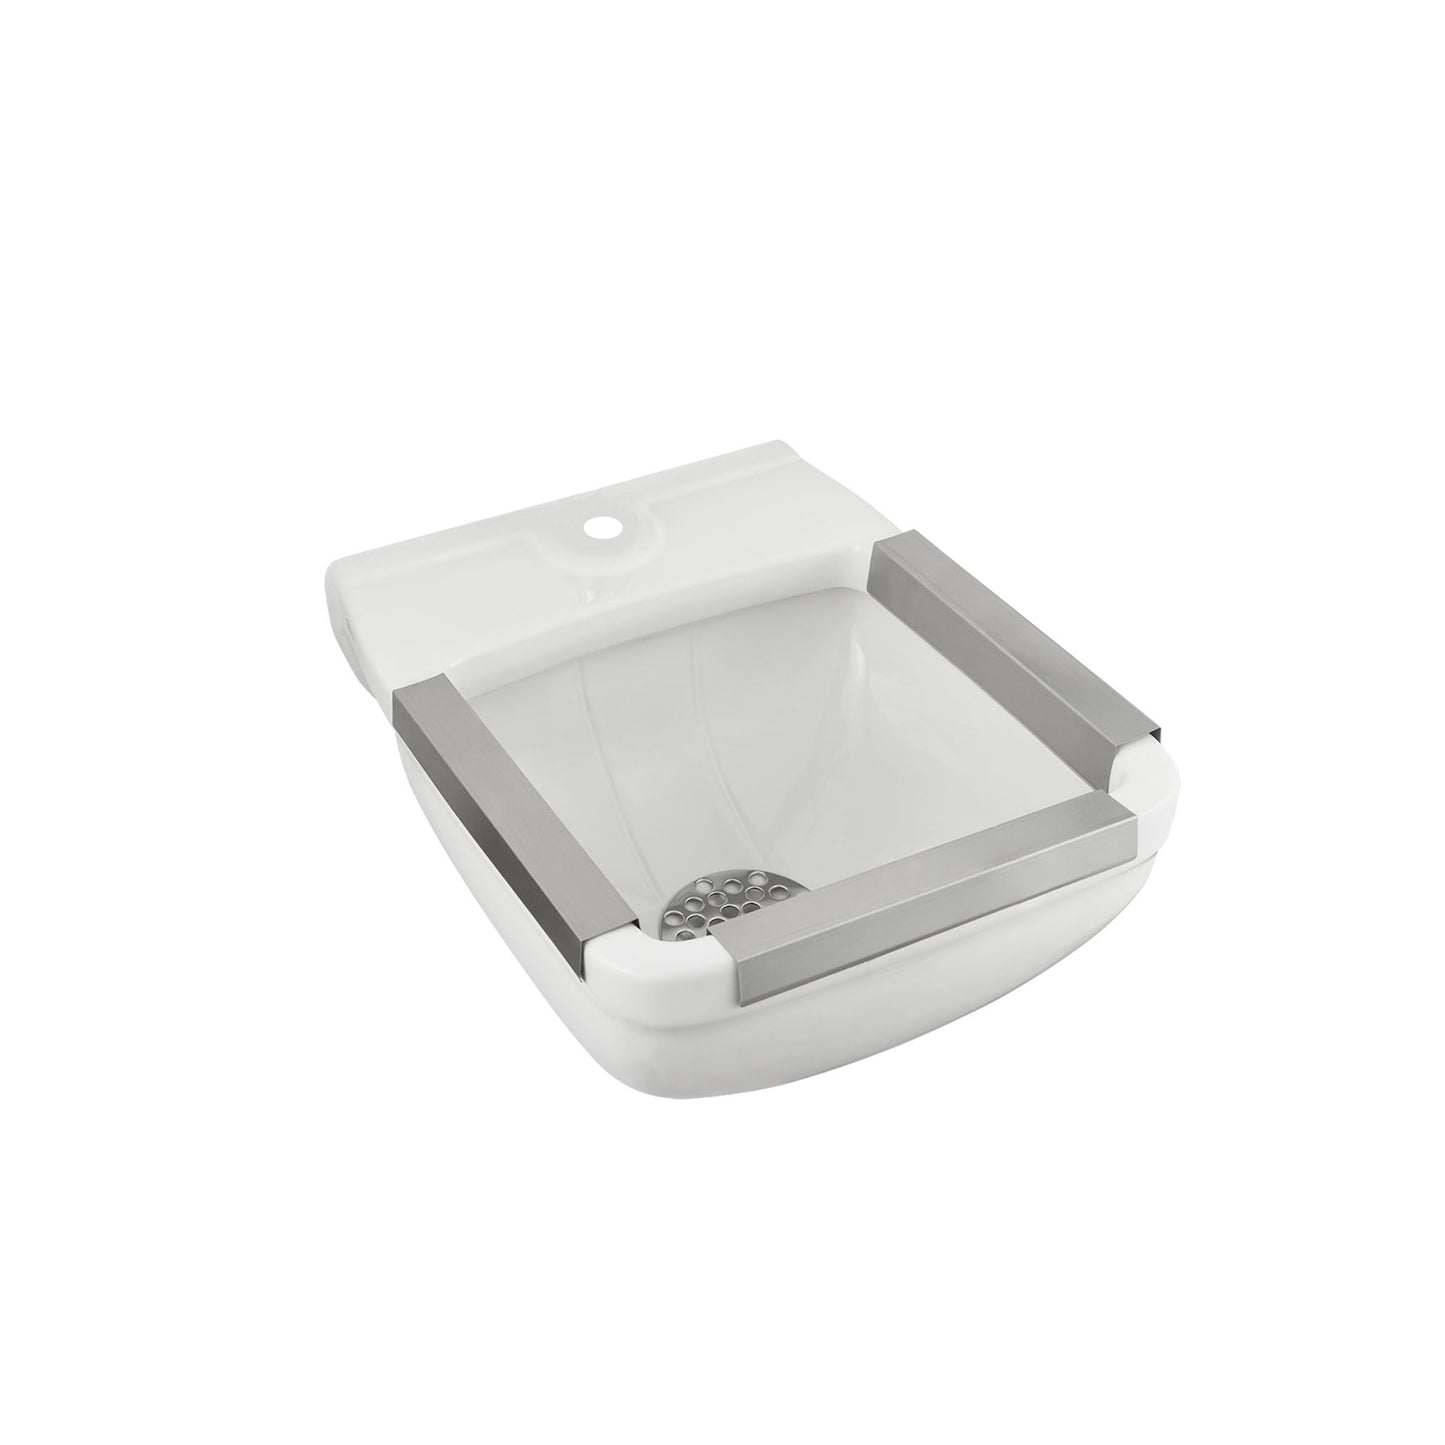 9512999.02 - Wall Hung Clinic Service Sink - White